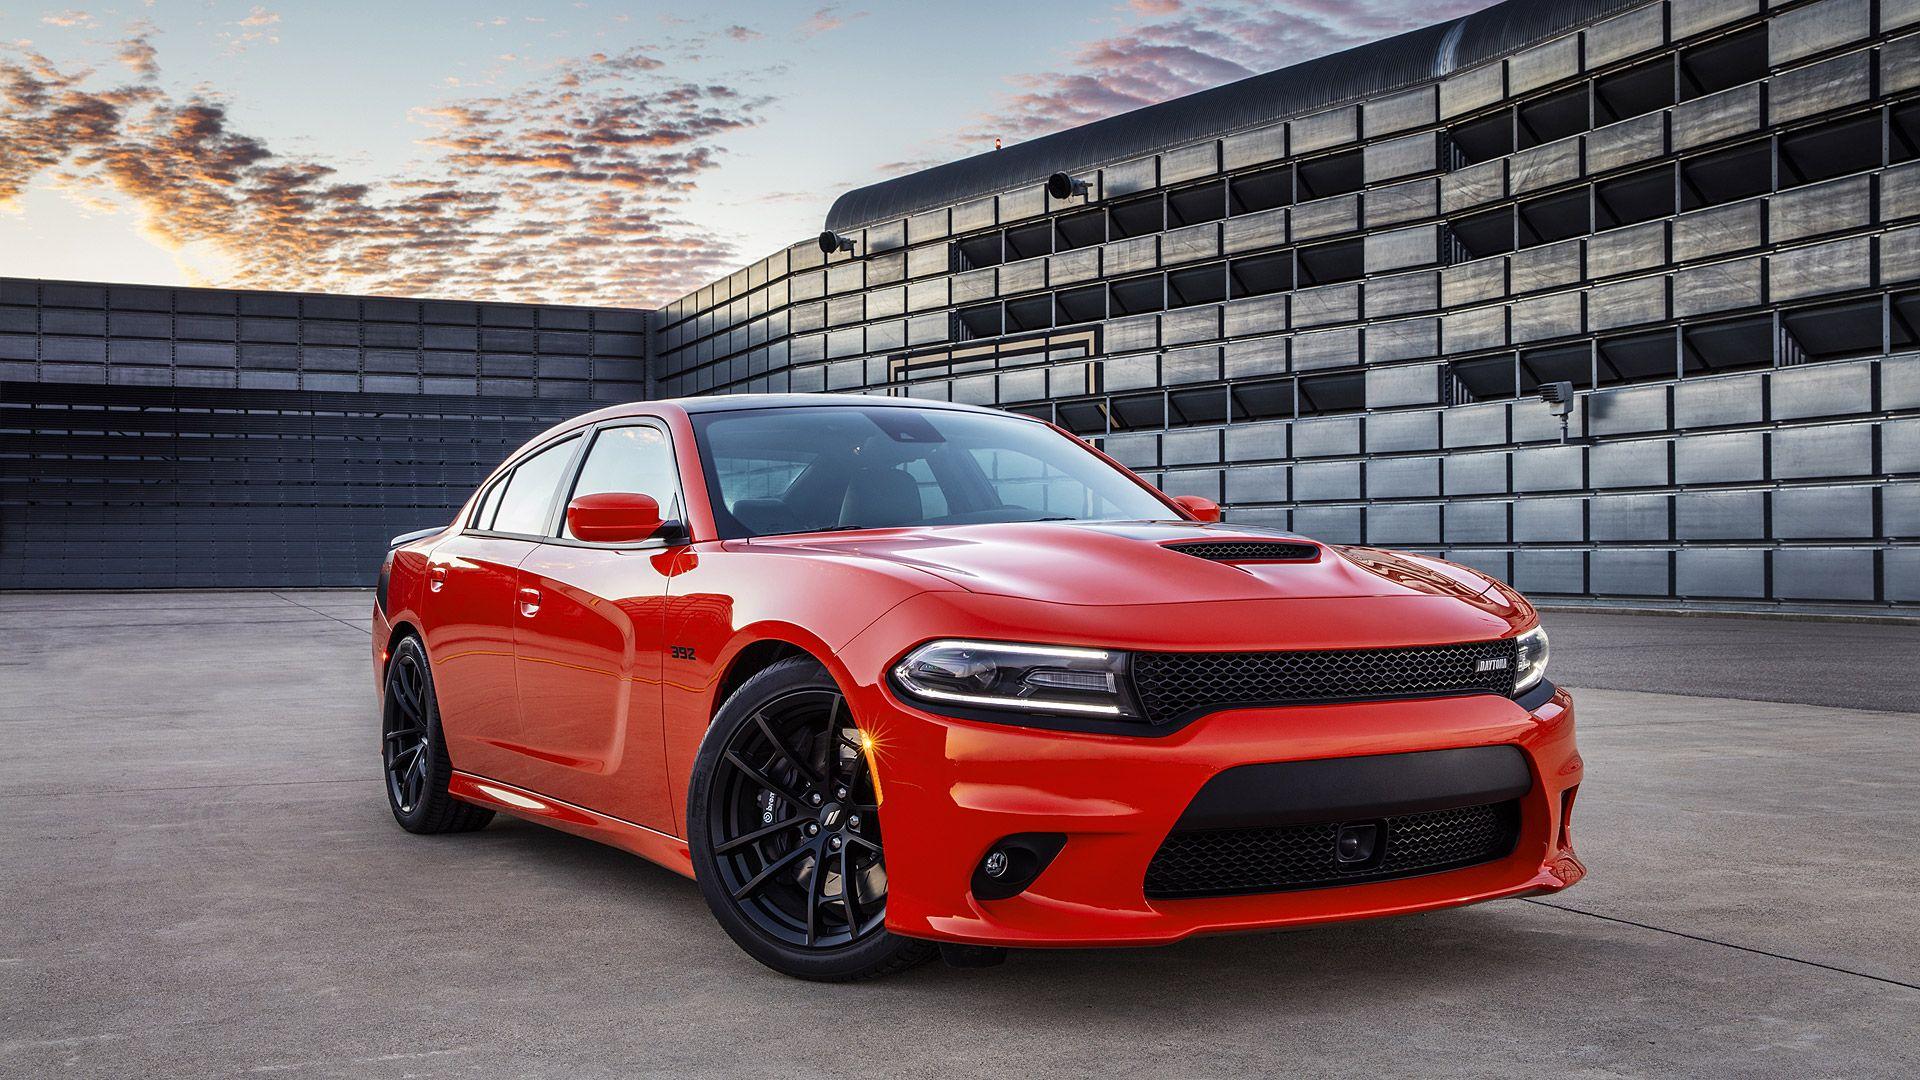 Wallpapers Dodge Charger - Wallpaper Cave